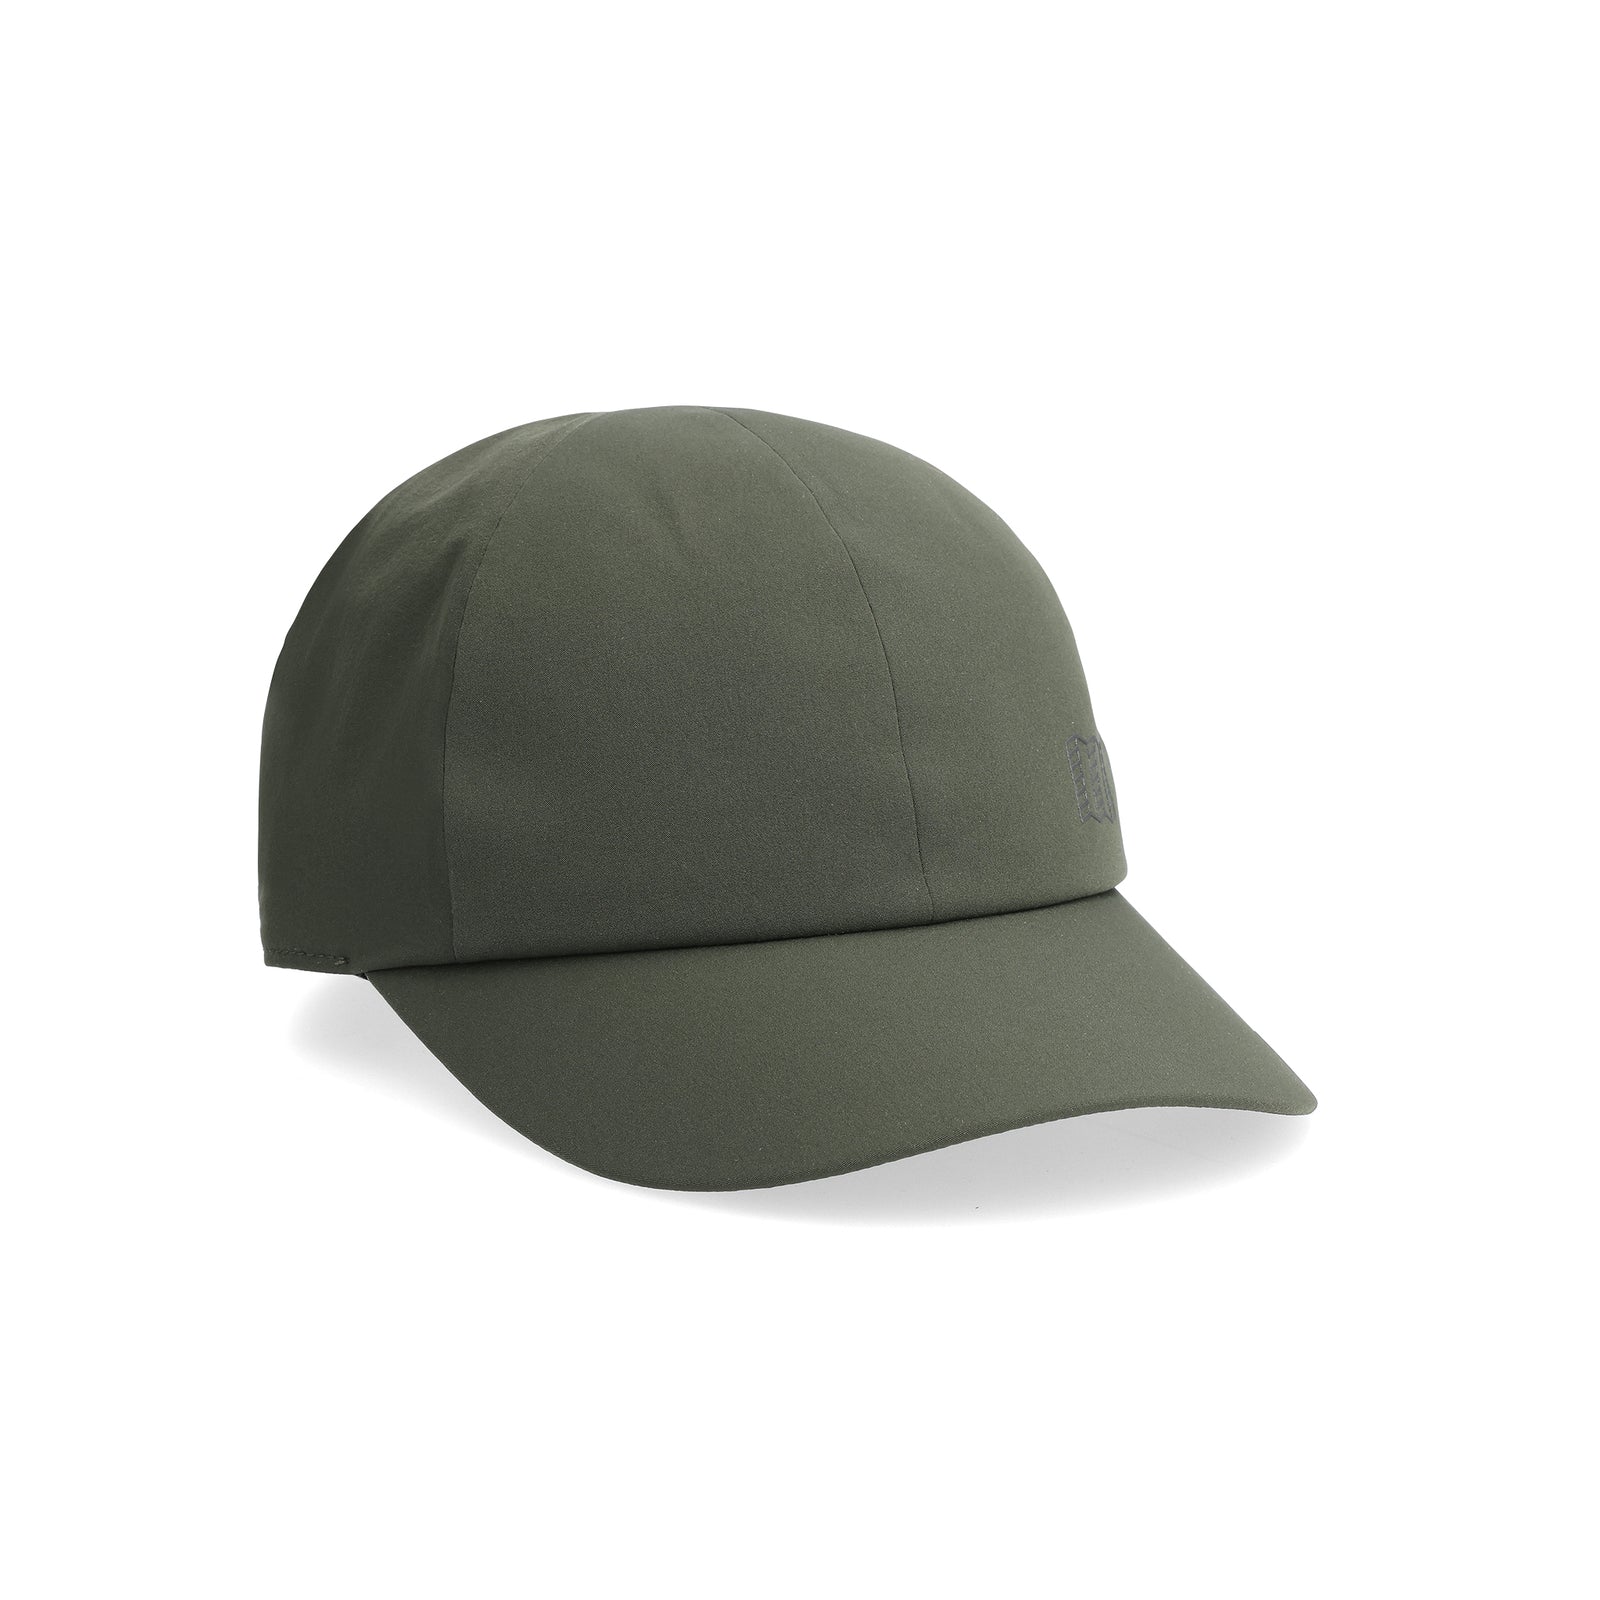 Side View of Topo Designs Global Tech Cap in "Olive"